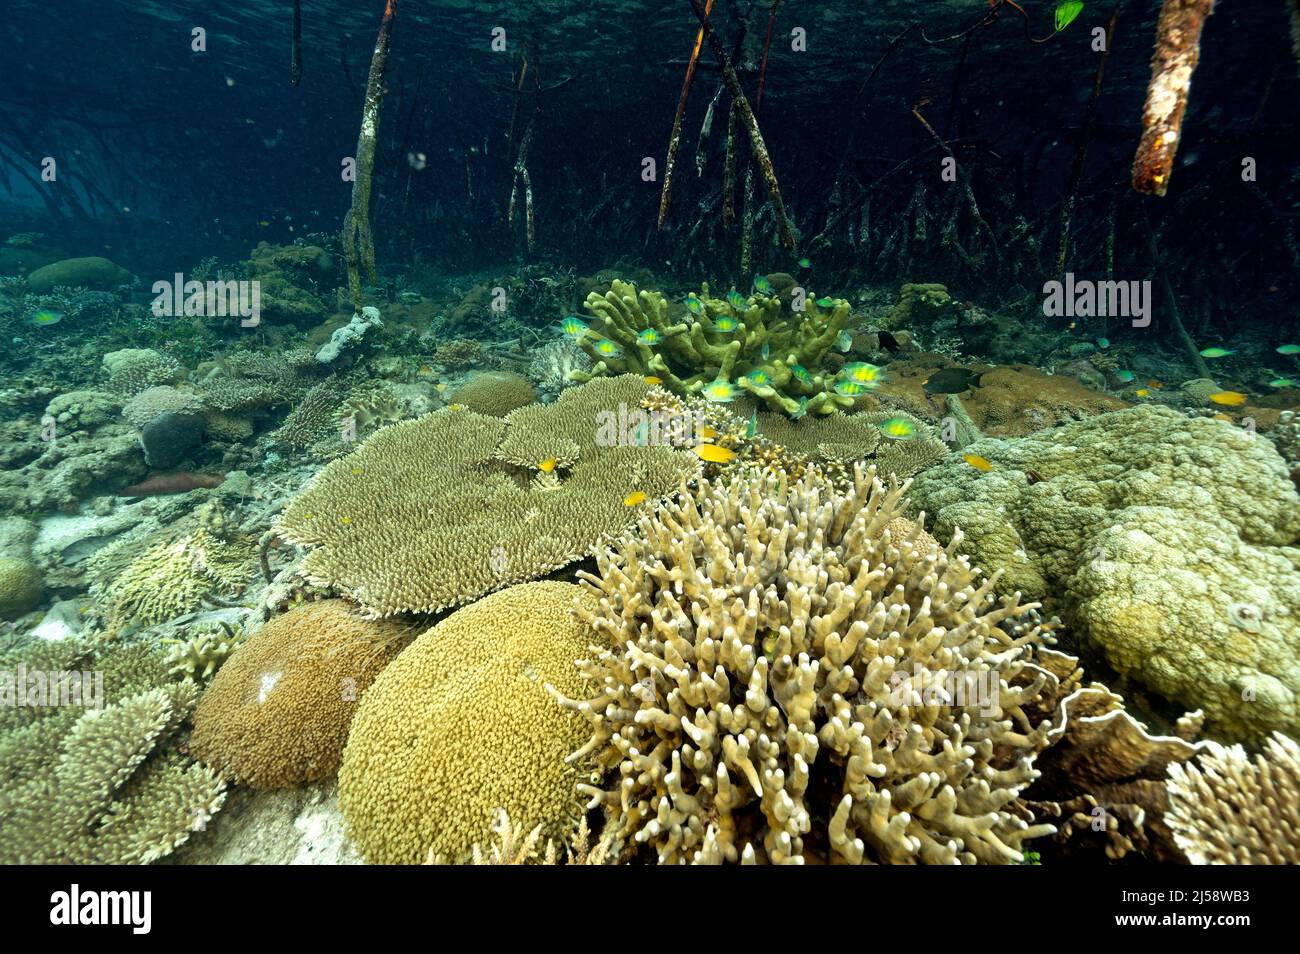 Reef scenic with hard corals under mangrove forest, Raja Ampat Indonesia. Stock Photo